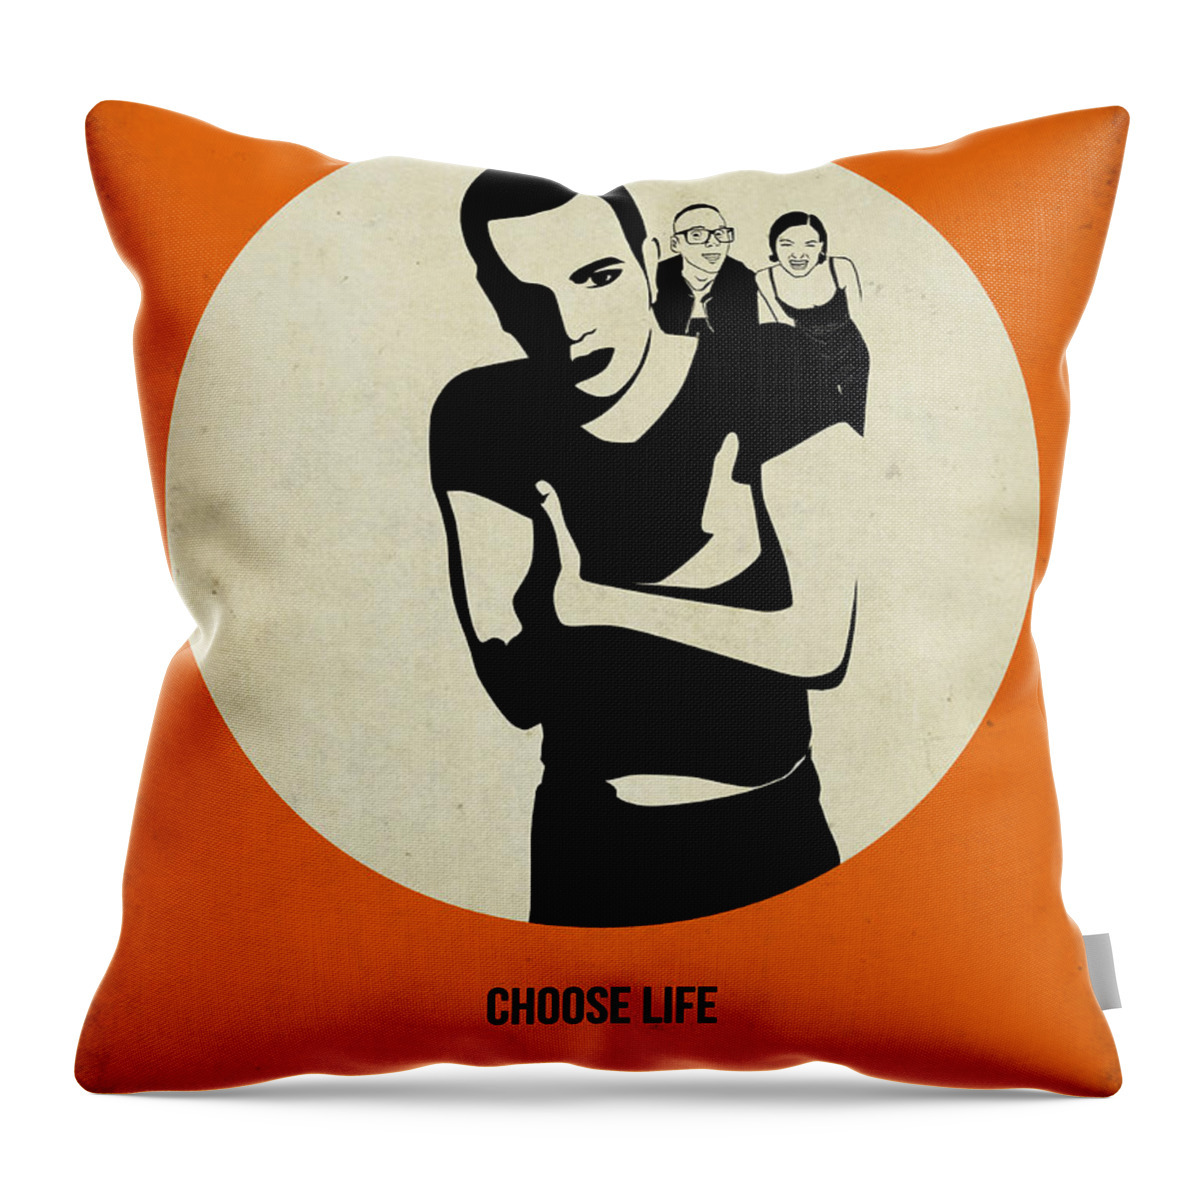 Trainspotting Throw Pillow featuring the painting Trainspotting Poster by Naxart Studio